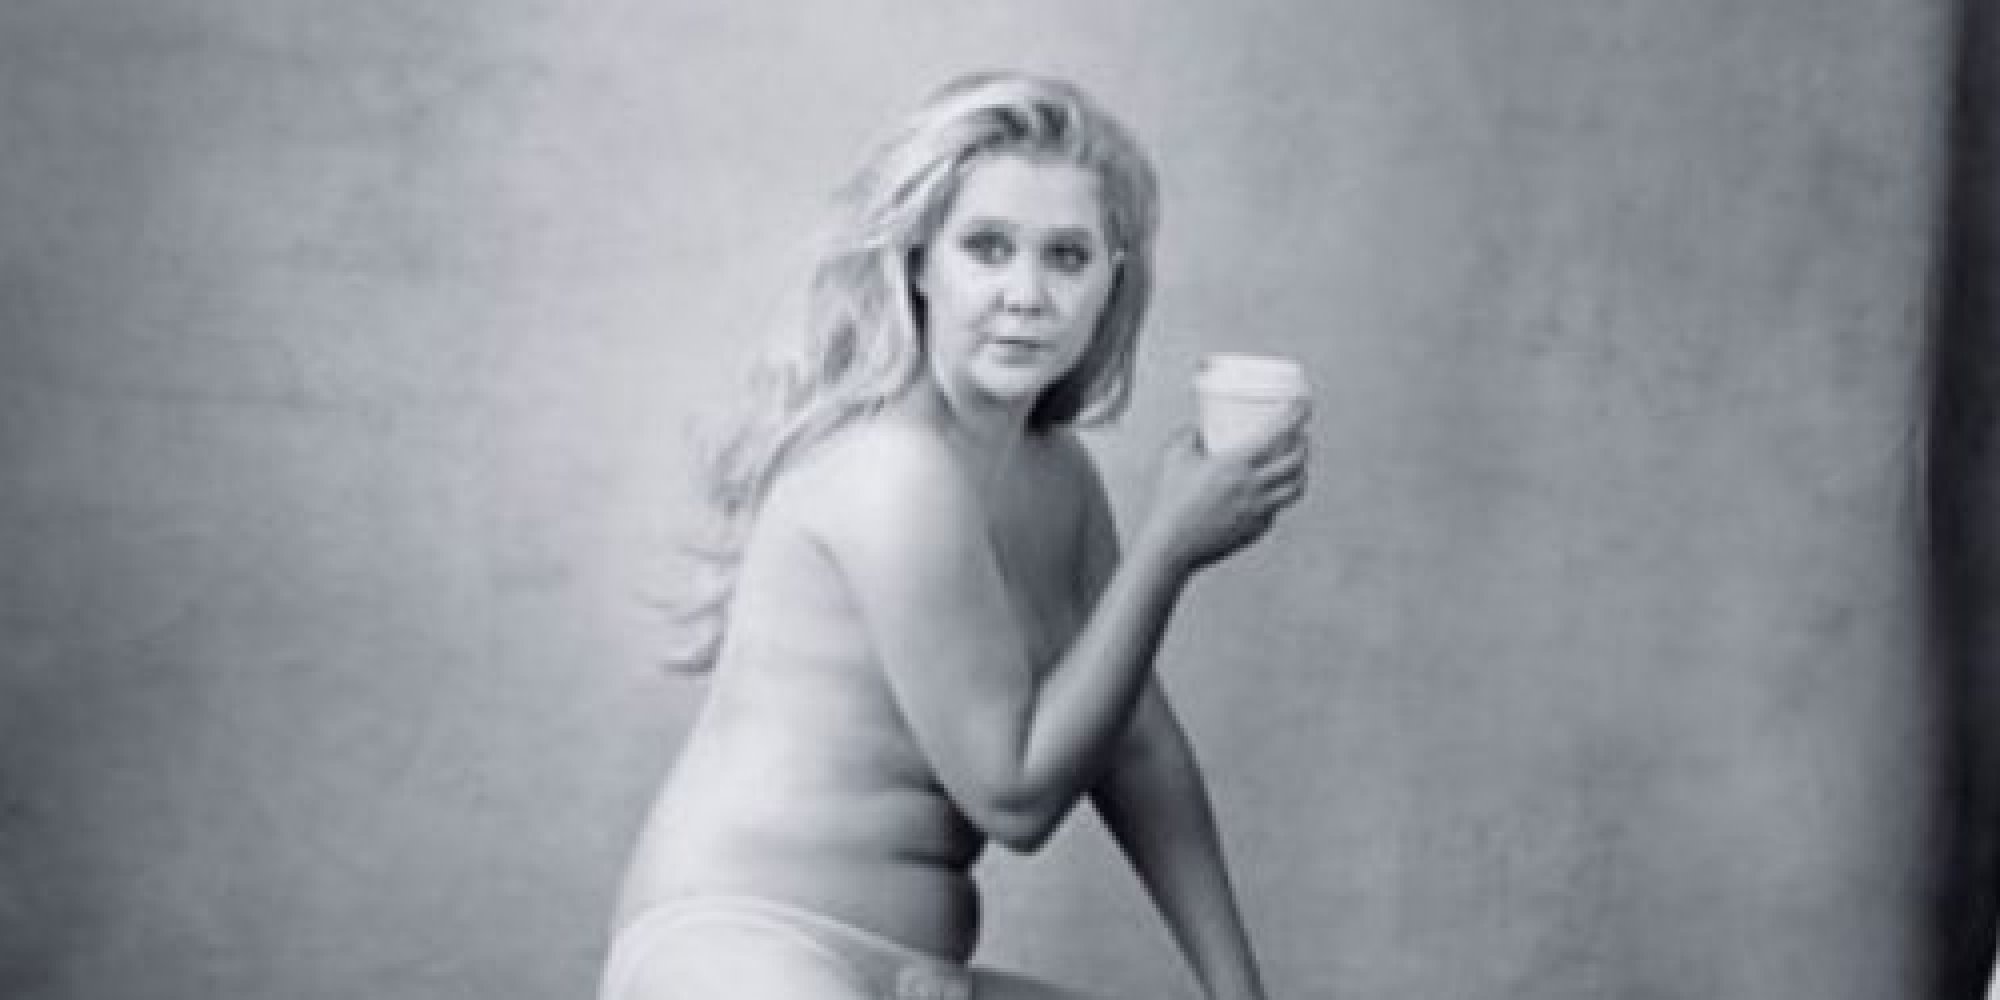 The 2016 Pirelli Calendar Is Here And Sexier Than Expected (NSFW)